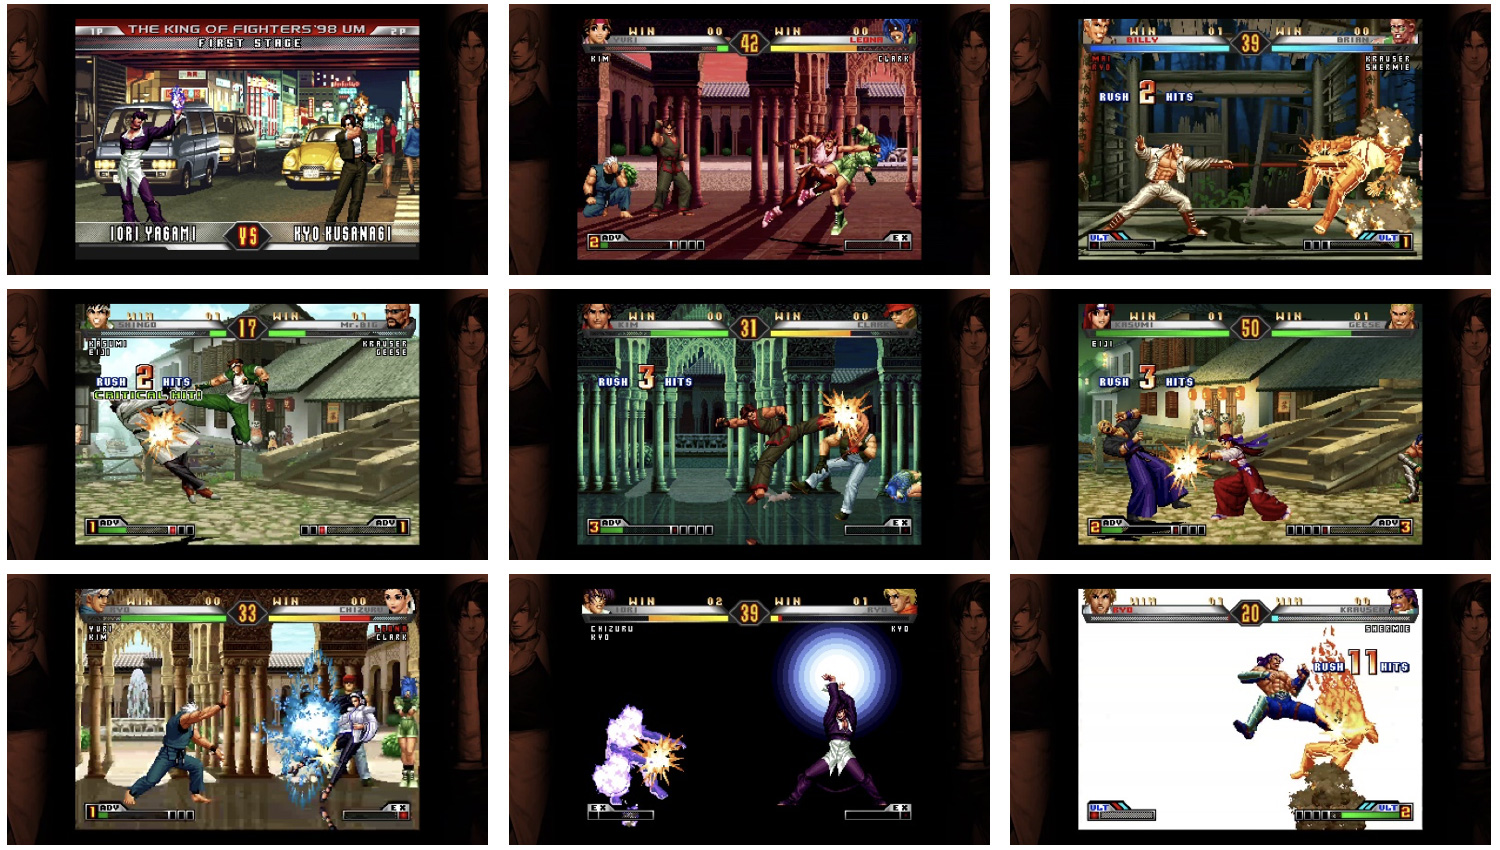 Steam Community :: Guide :: KOF 98 UMFE Graphic Filters - UPDATED